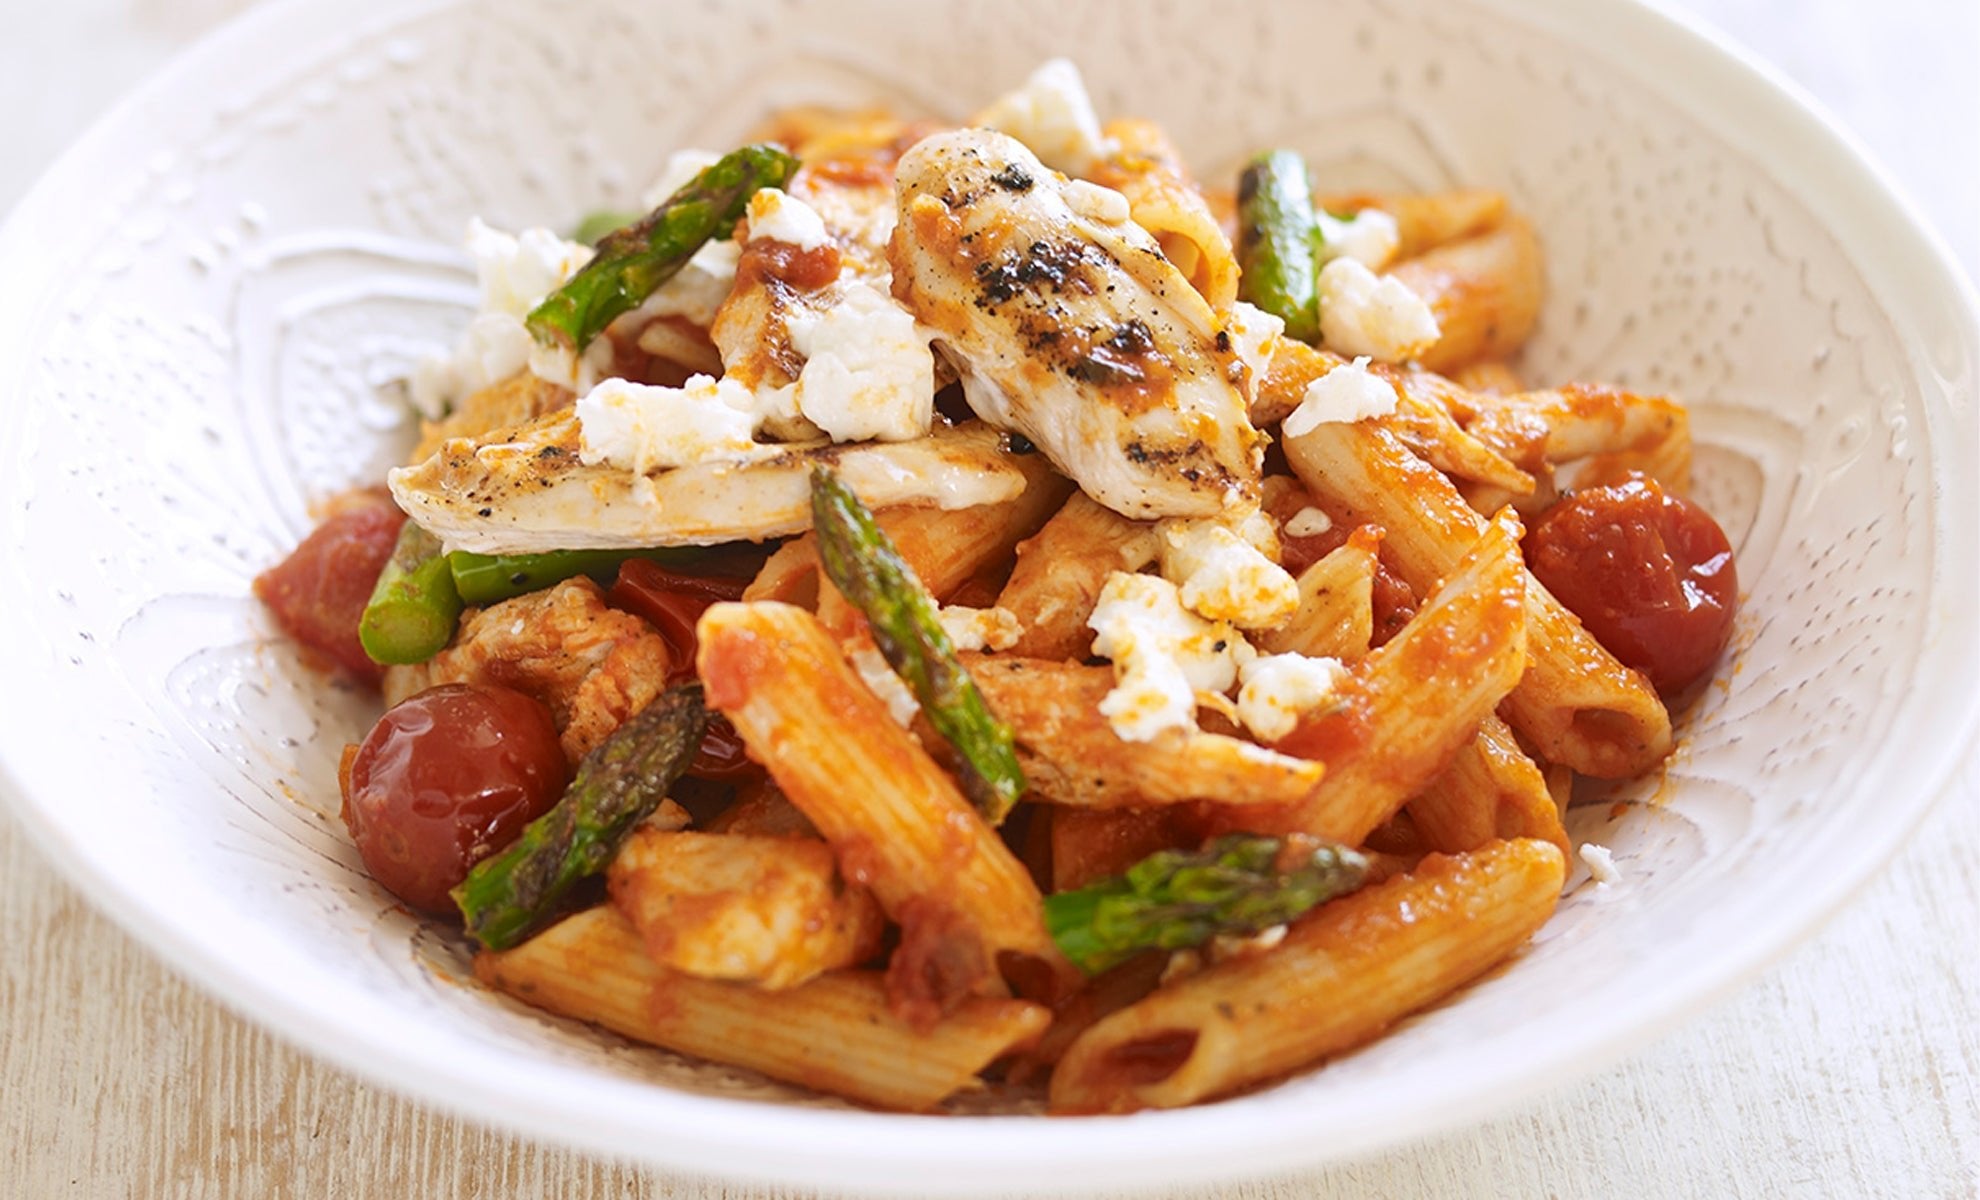 Whole Cherry Tomato & Basil Pasta with Chicken & Goat's Cheese